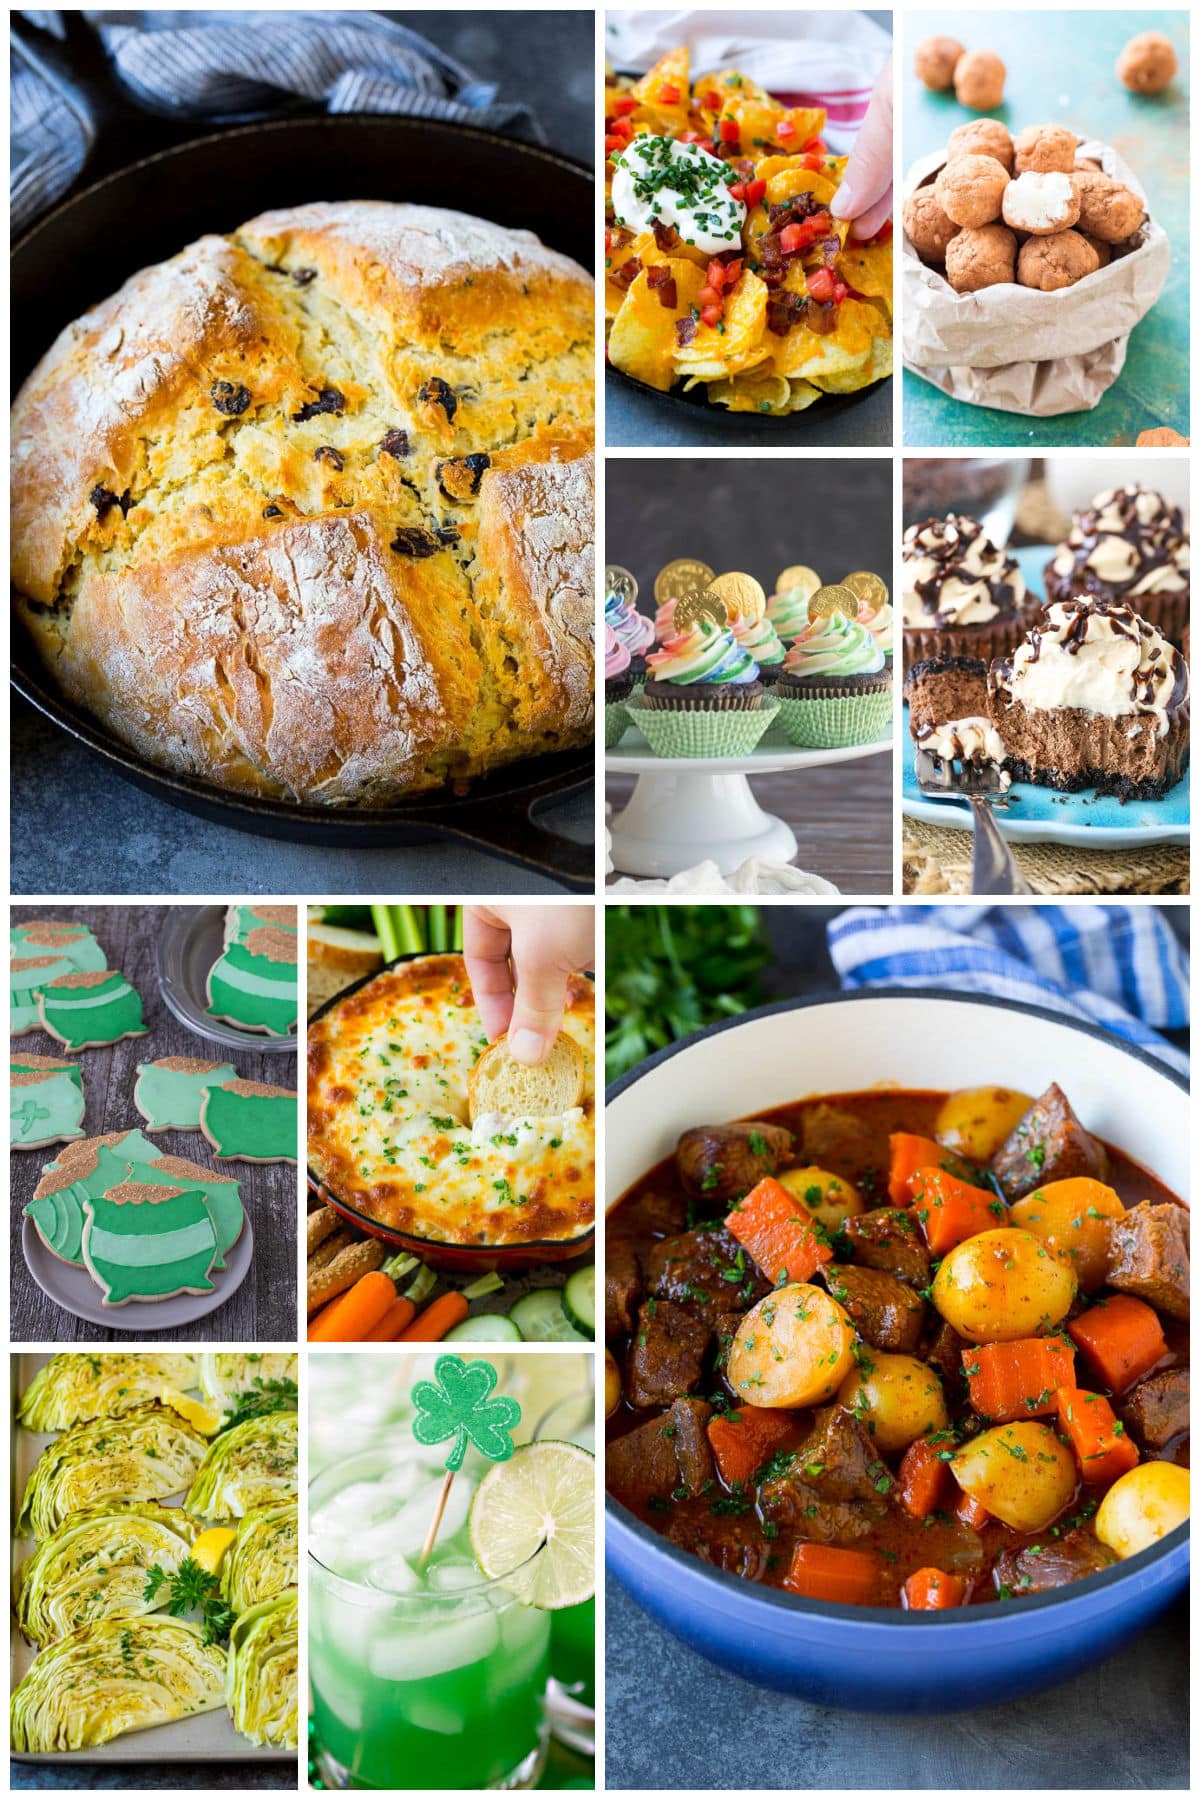 A group of festive green holiday dishes such as roasted cabbage, Irish stew and Reuben dip.